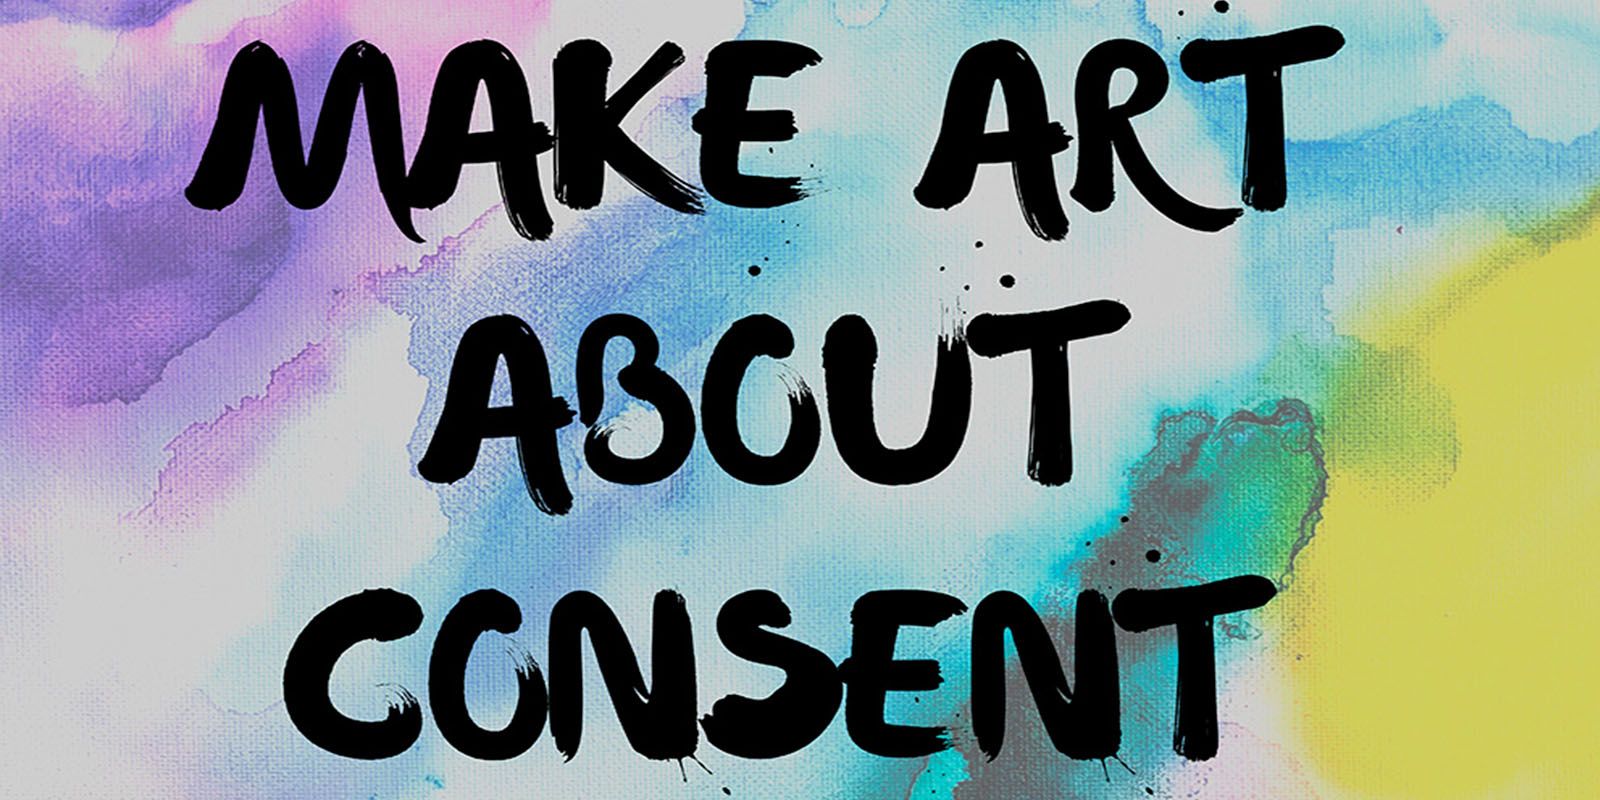 A text based image that says 'Make Art About Consent'